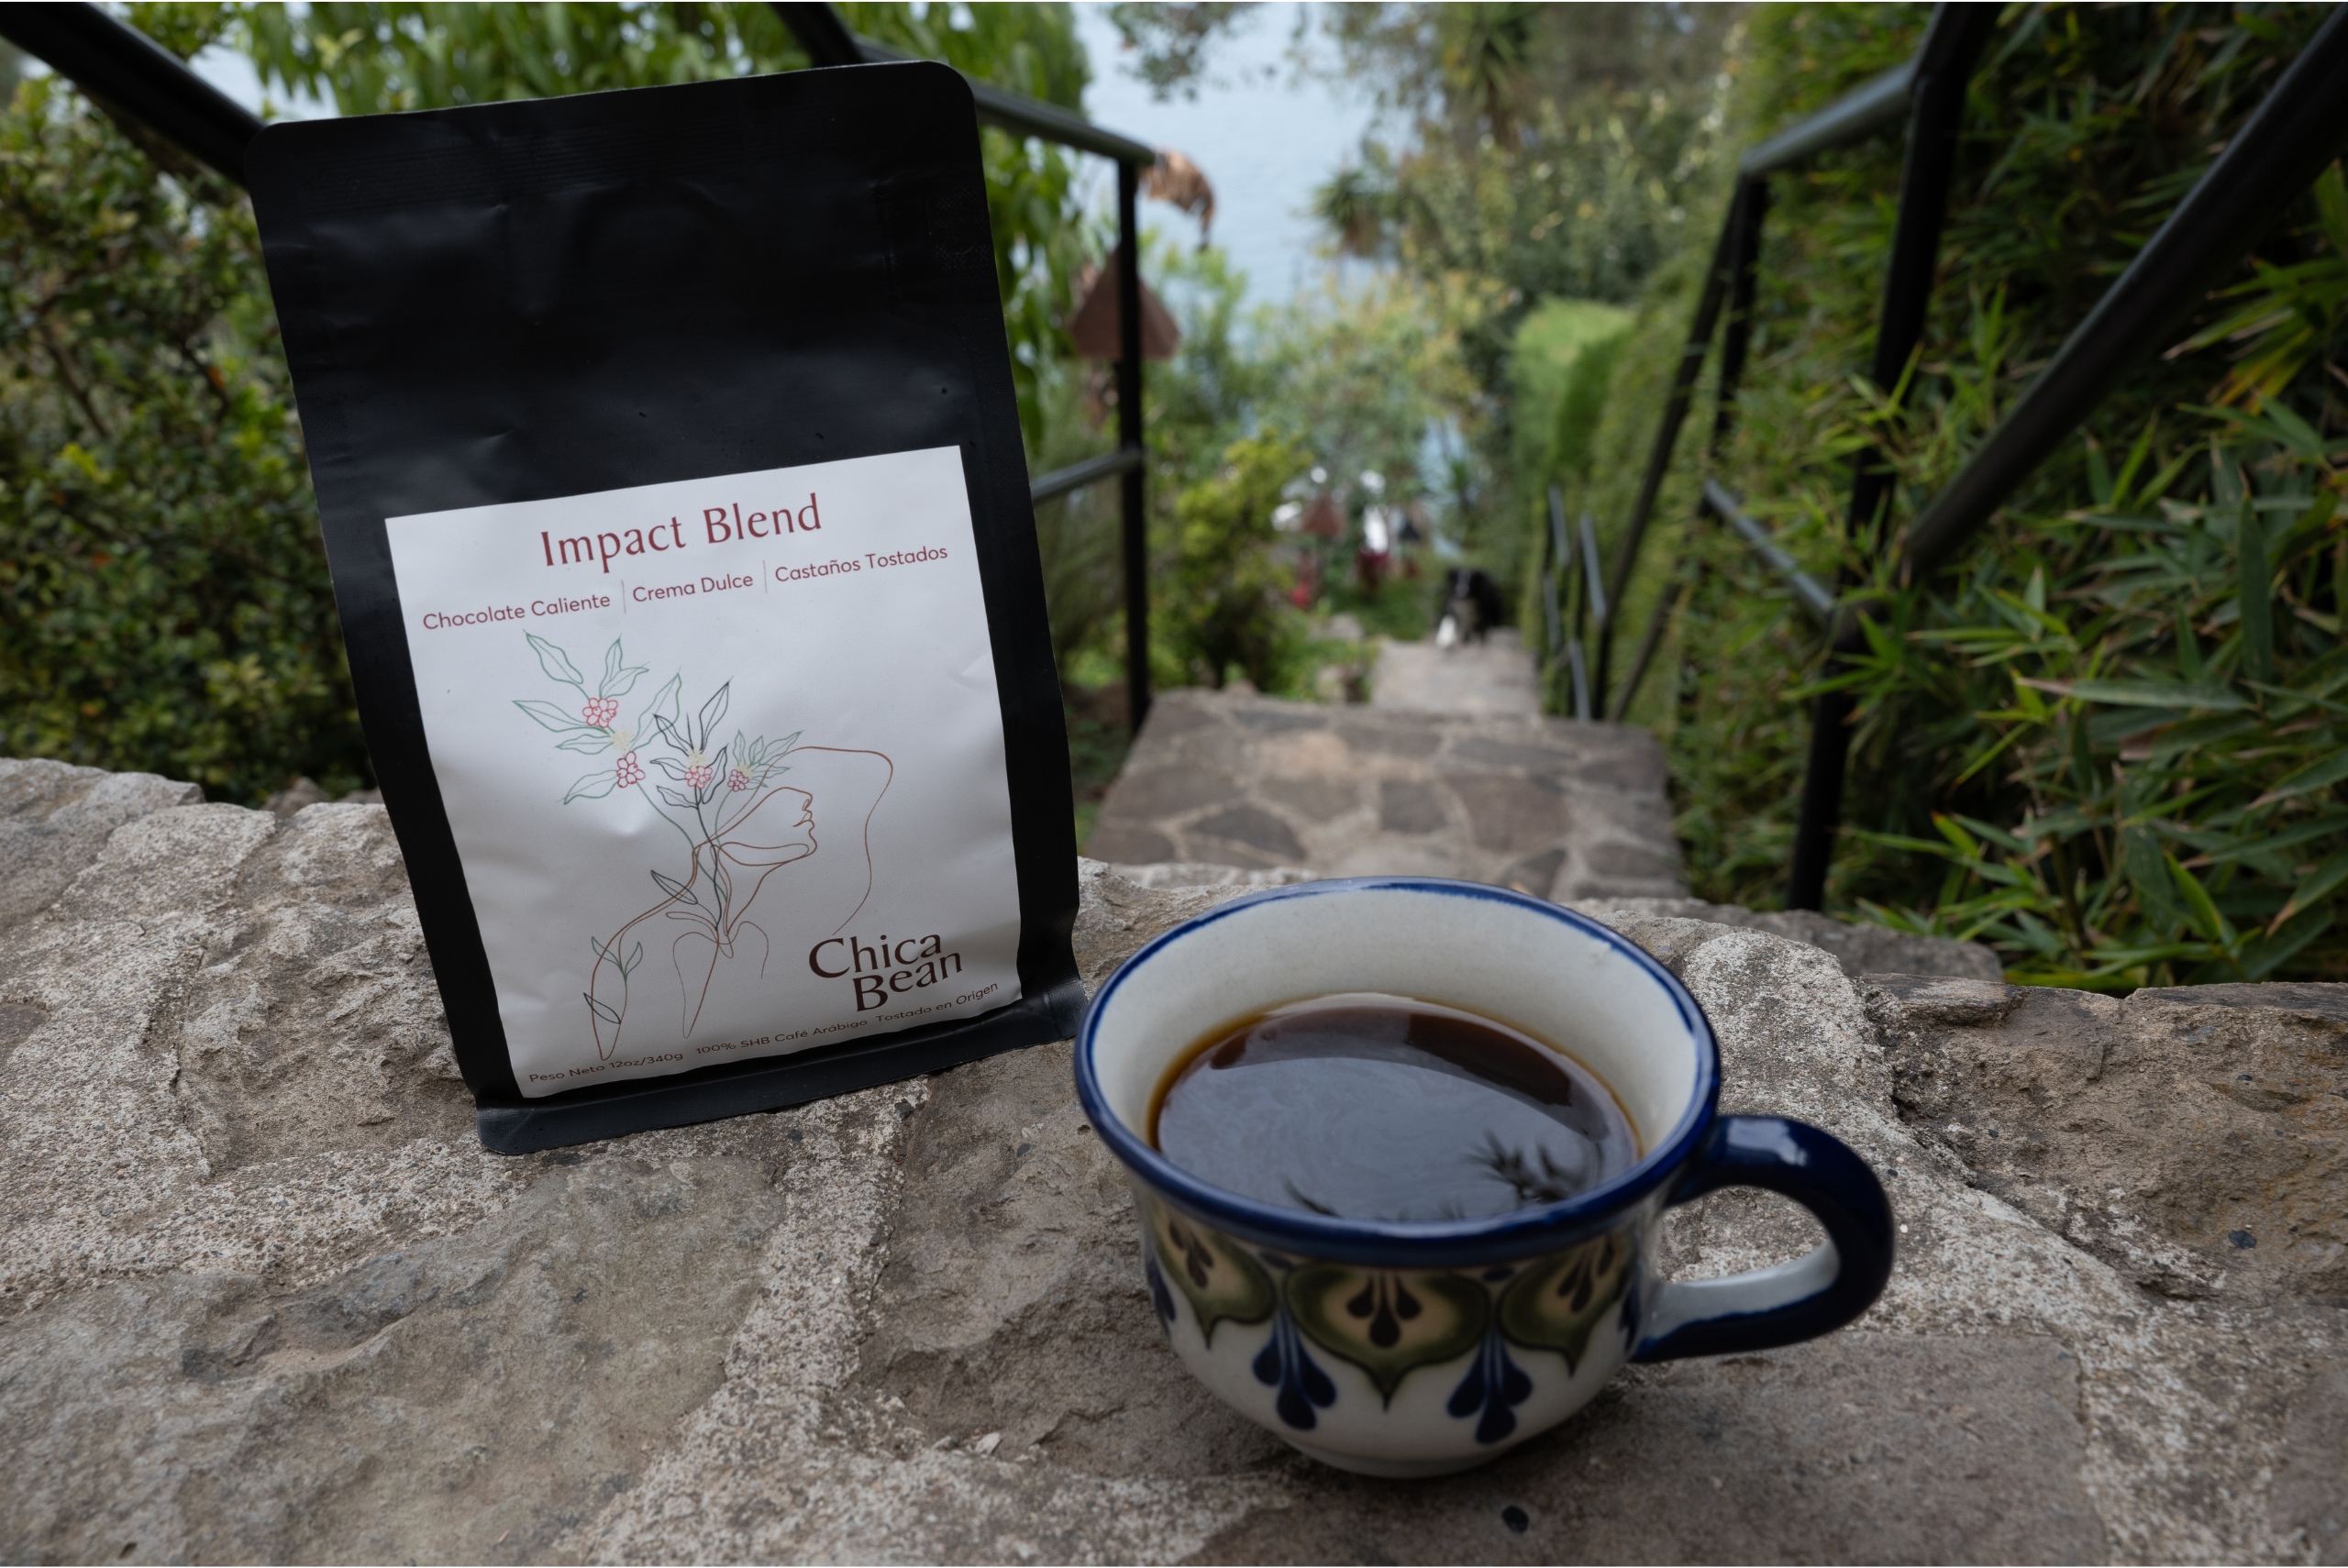 A picture of a bag of coffee called Impact Blend and a beautiful cup of coffee on a stone stairway in a lush green garden